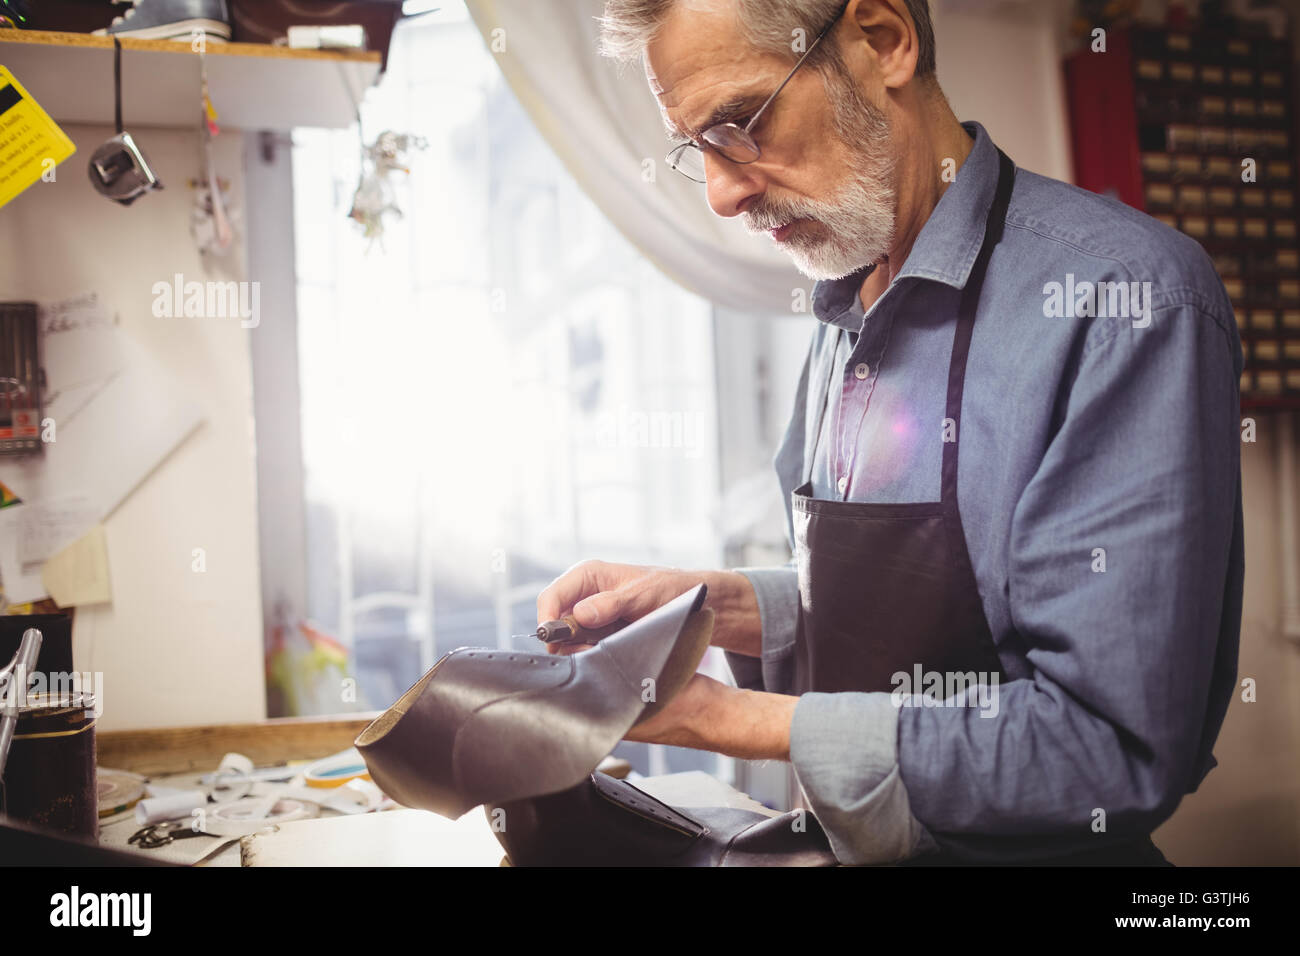 Profile view of cobbler making a shoe Stock Photo